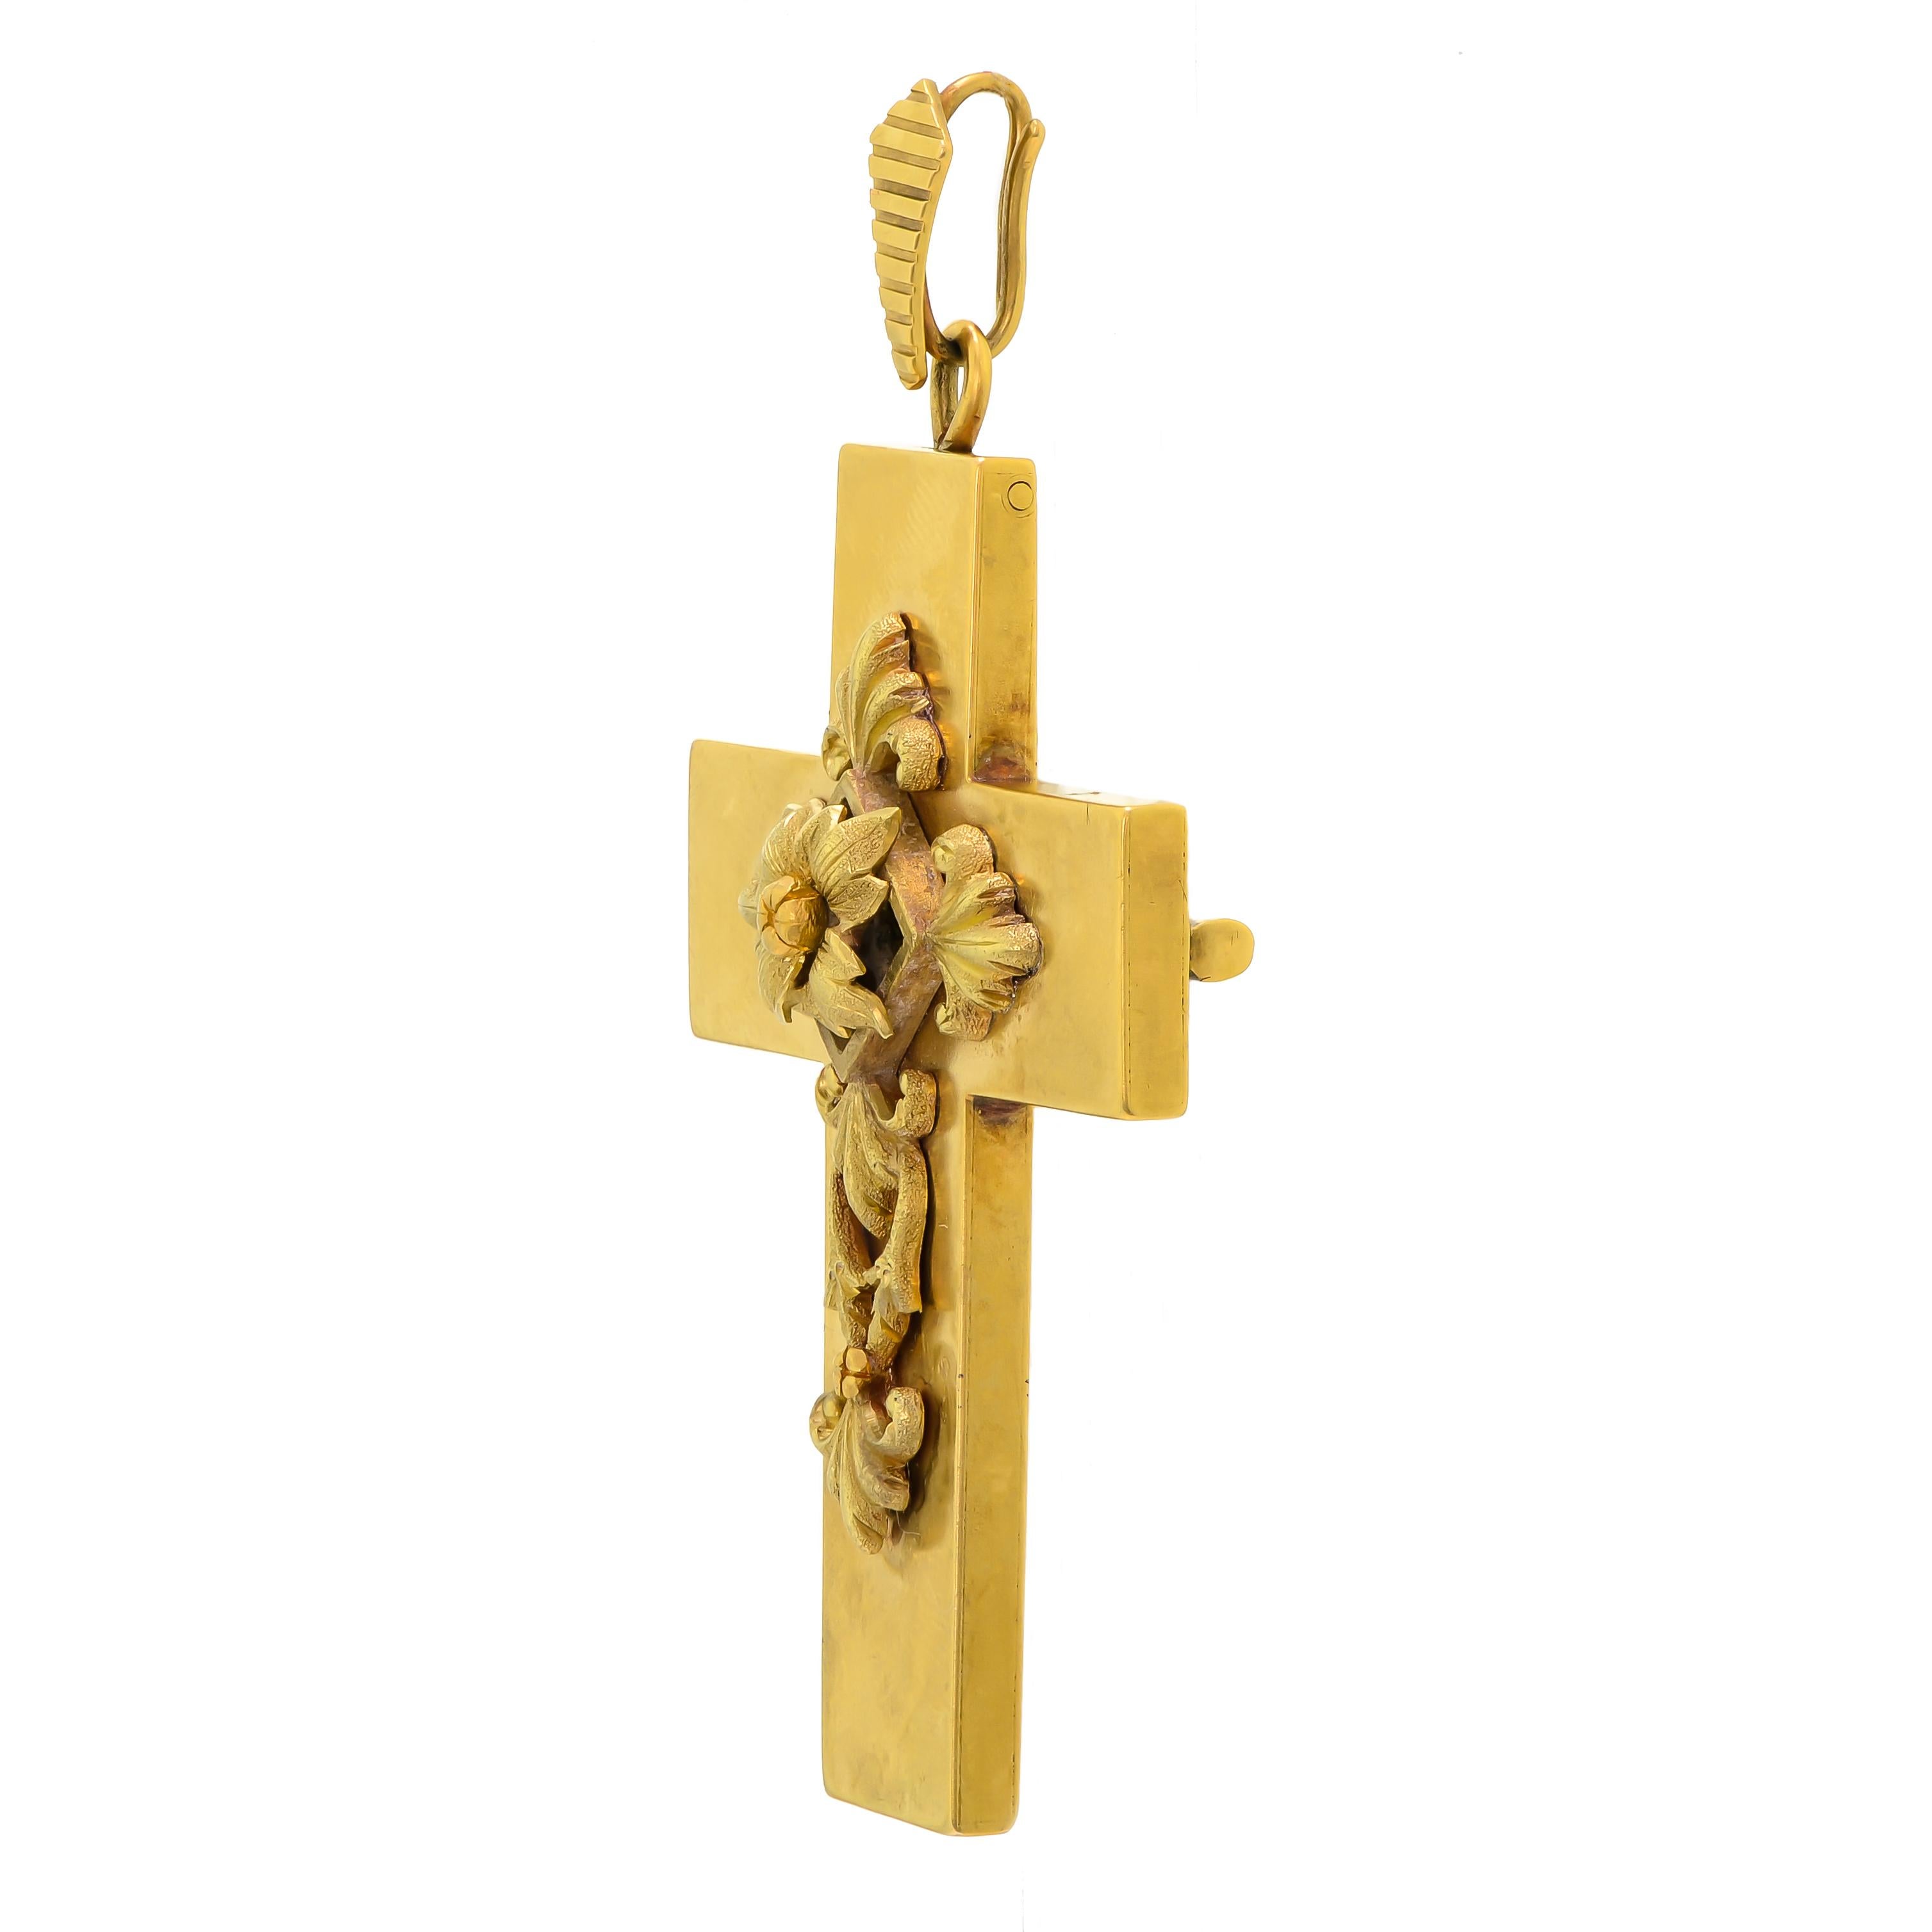 This impressive antique Victorian gold cross complete with an elaborate raised floral, leaf and ivy design exquisitely sculpted from yellow, green and rose gold retains a lovely patina naturally achieved over time since it was created. The cross